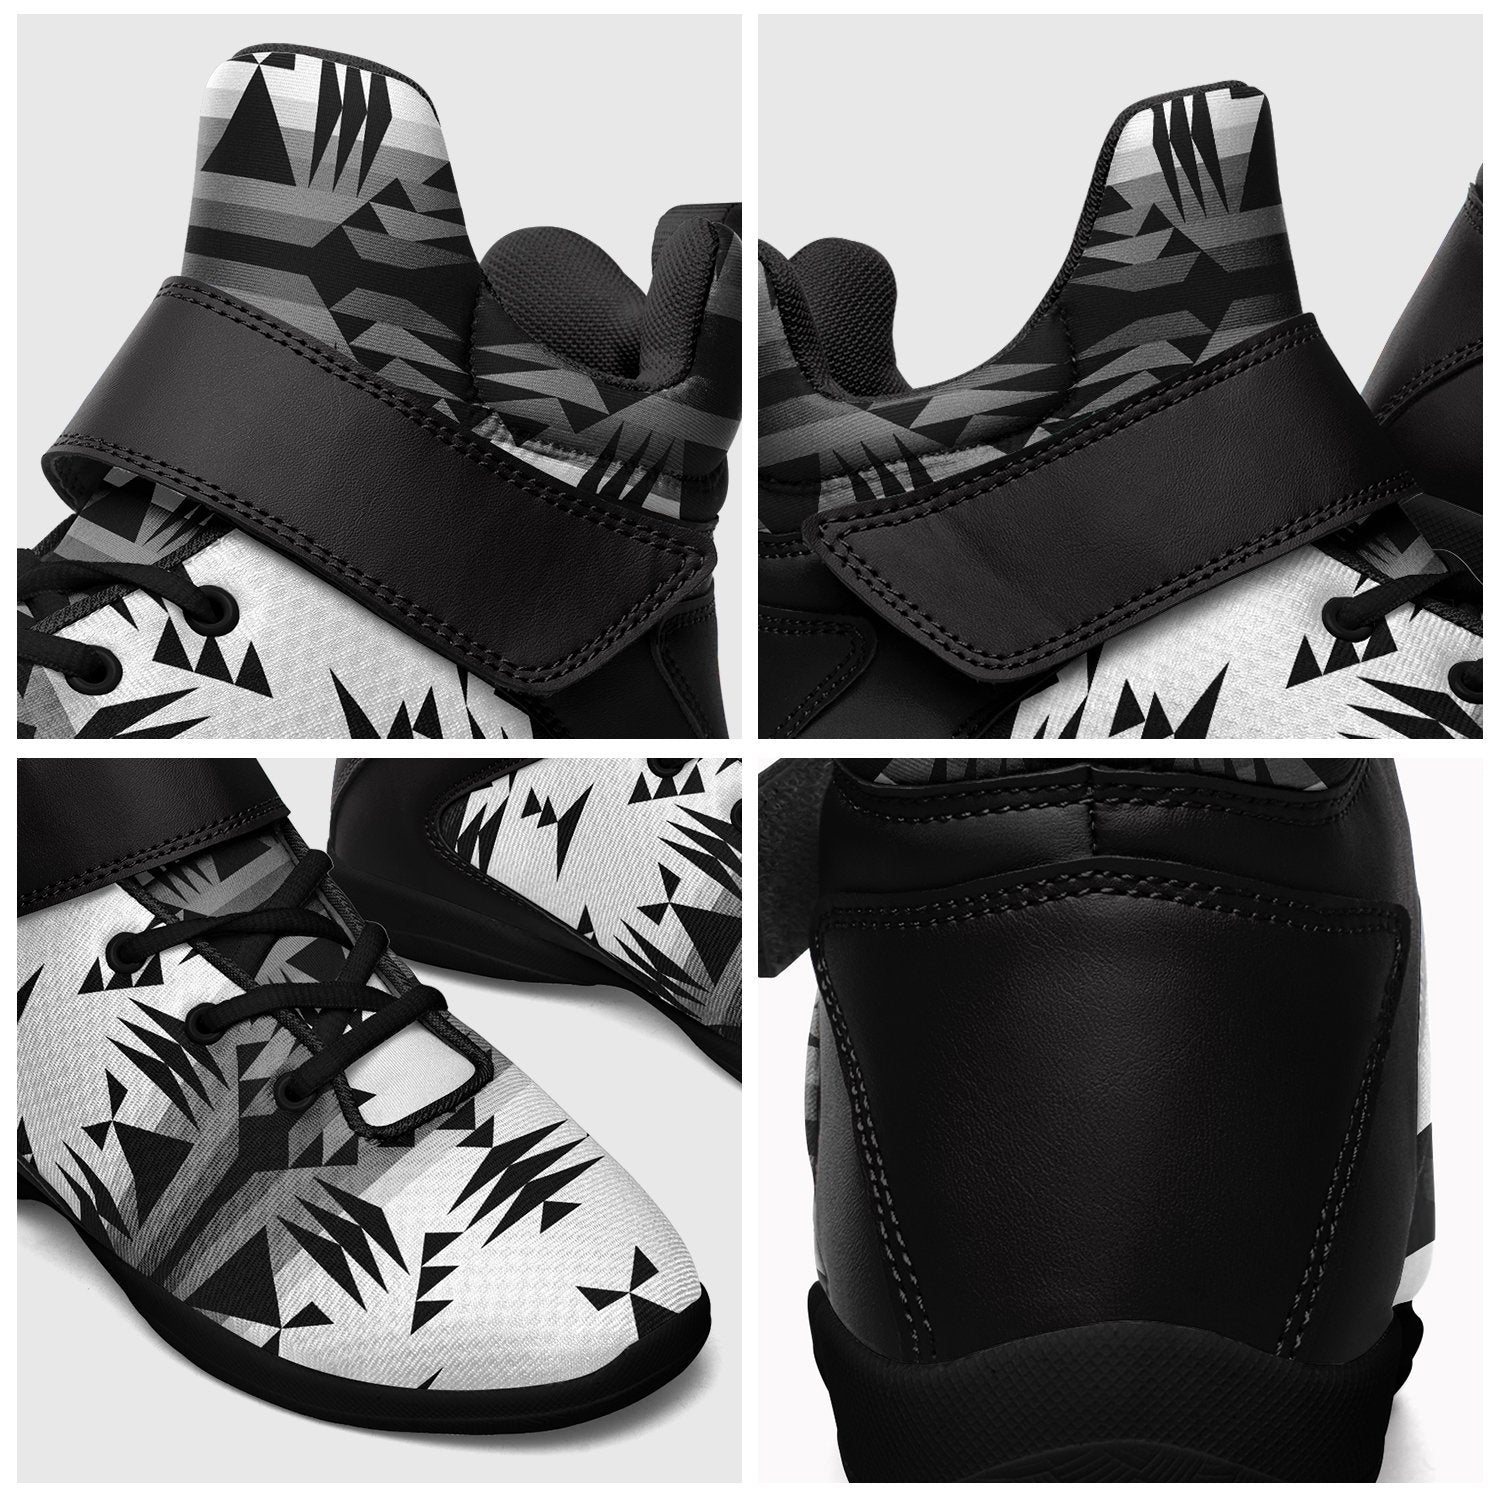 Between the Mountains White and Black Kid's Ipottaa Basketball / Sport High Top Shoes 49 Dzine 